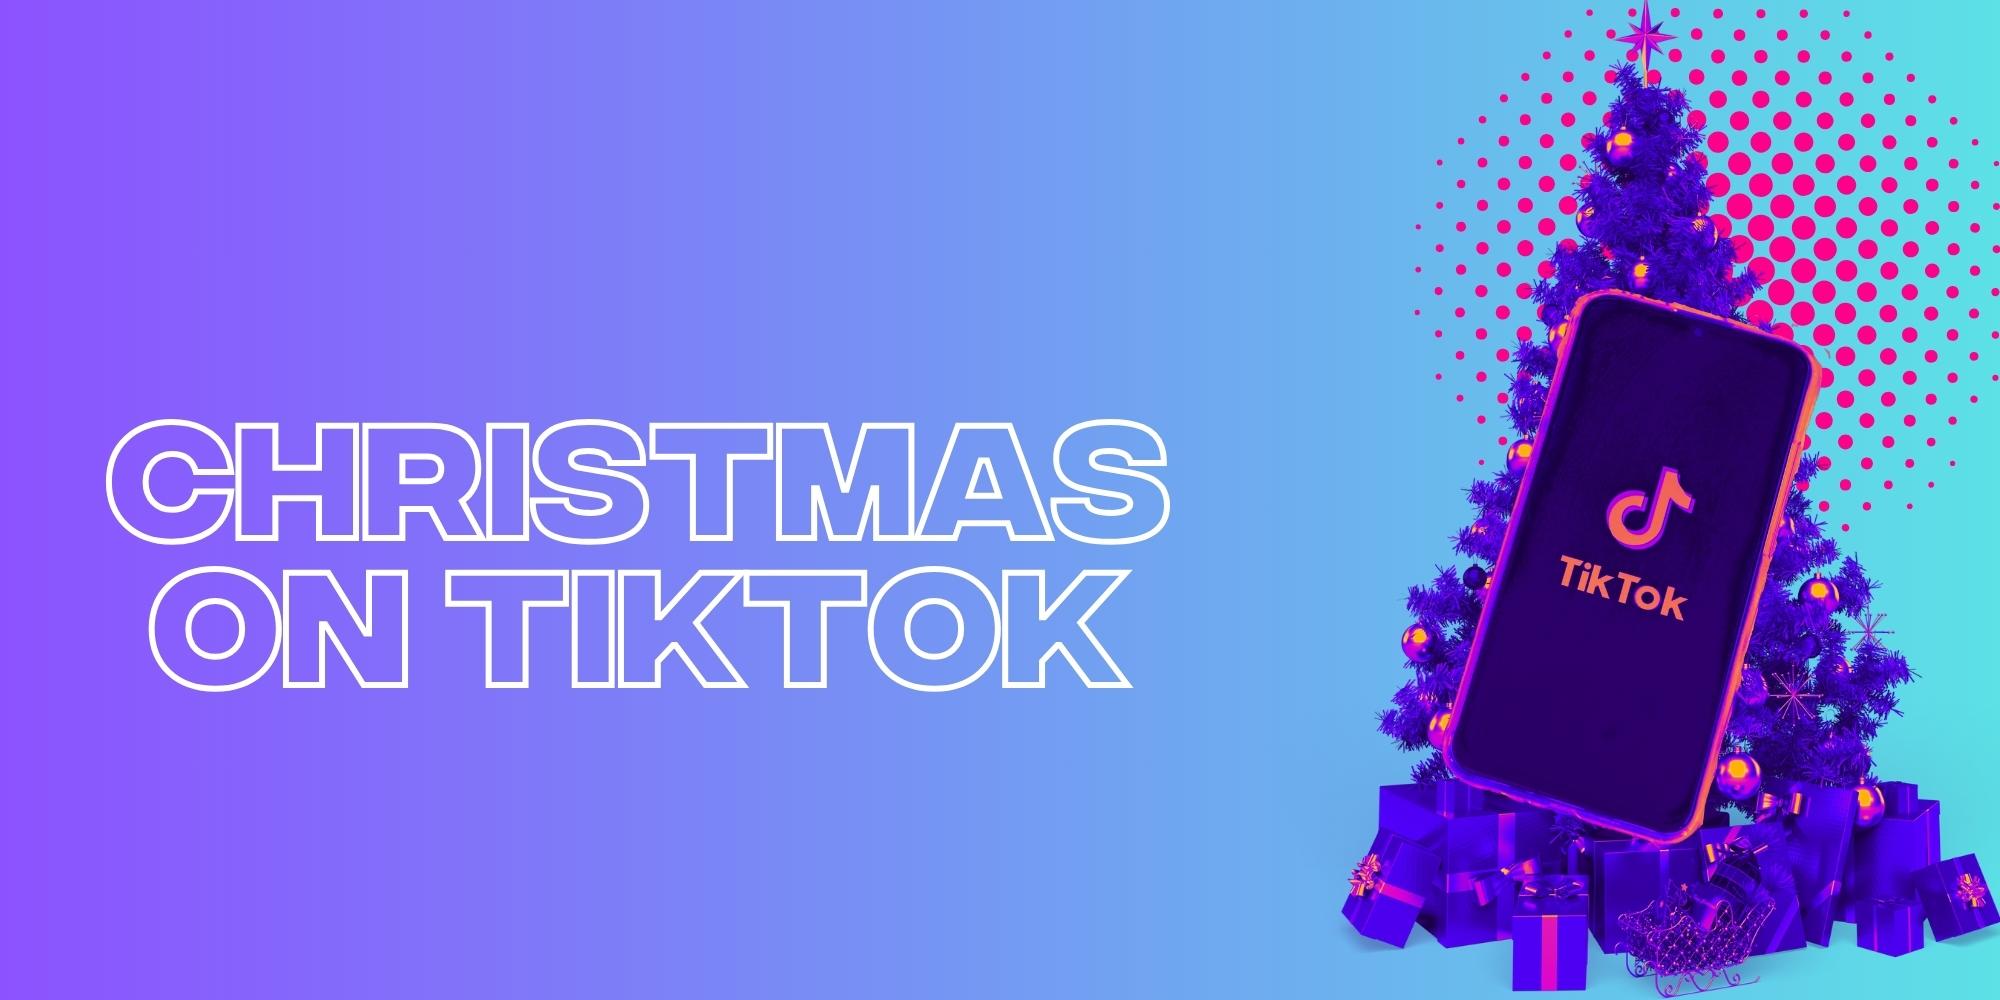 Creating Festive Content: Christmas Content Ideas For TikTok That Work